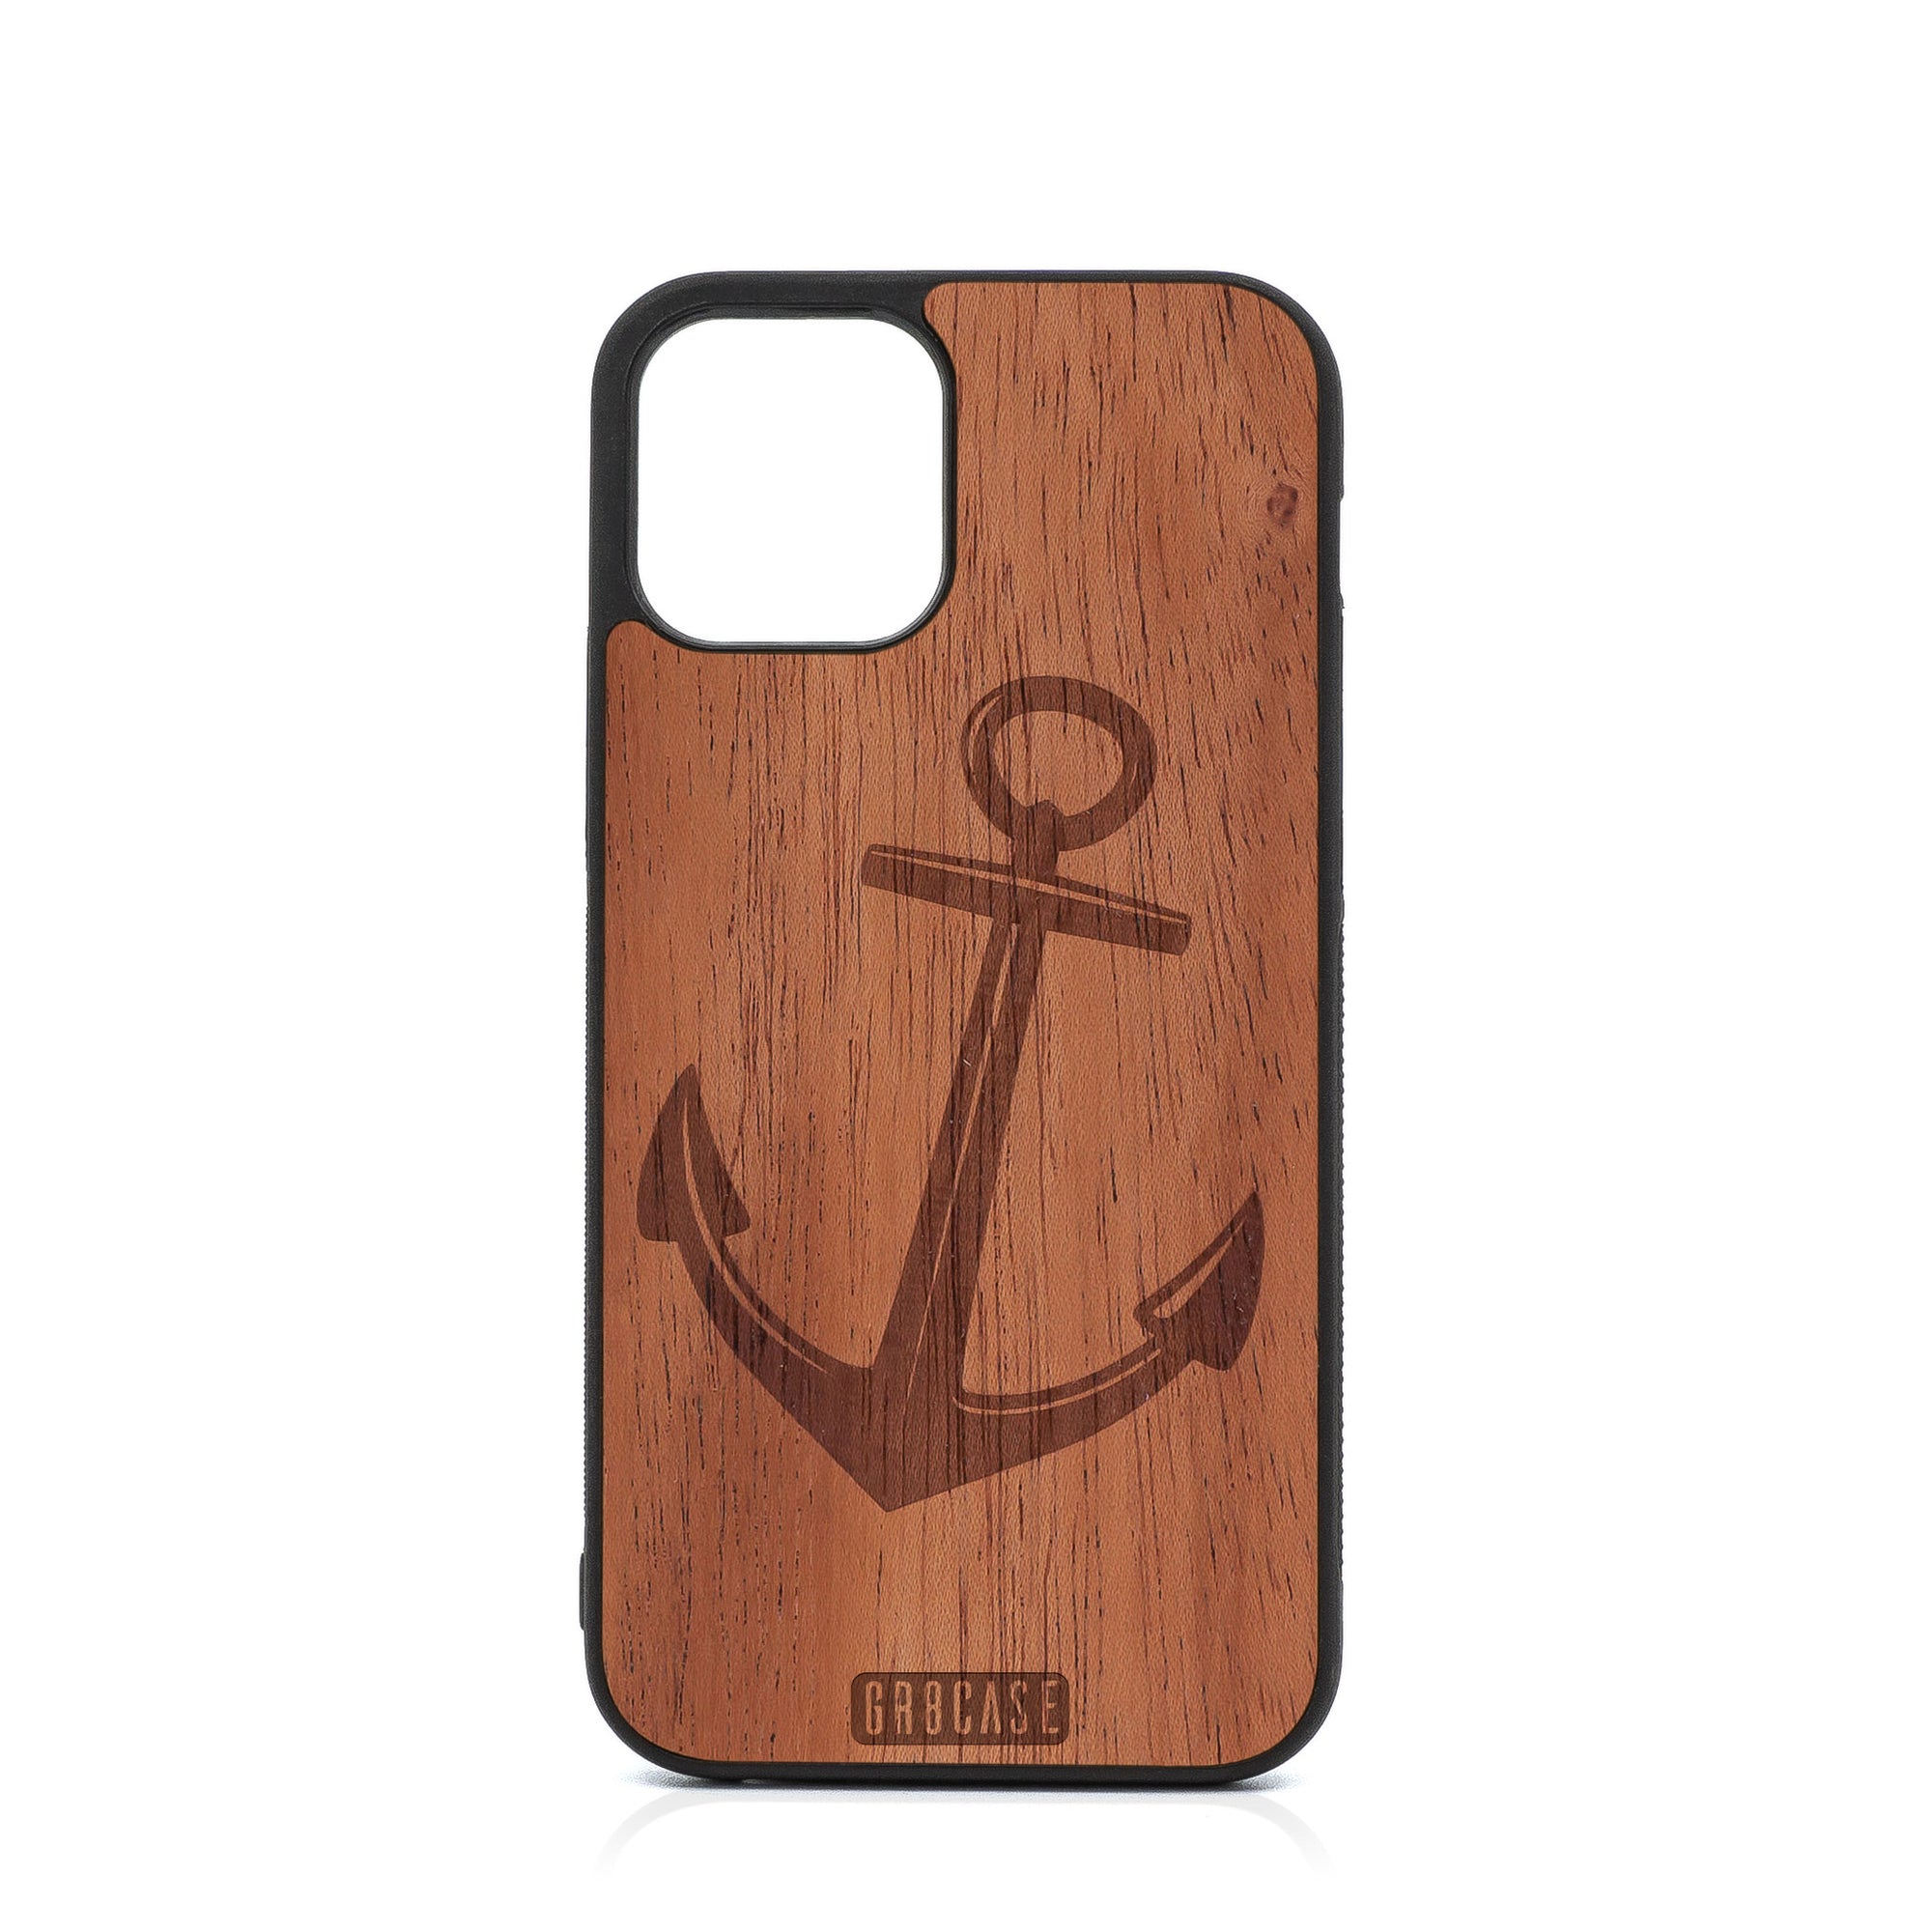 Anchor Design Wood Case For iPhone 12 Pro